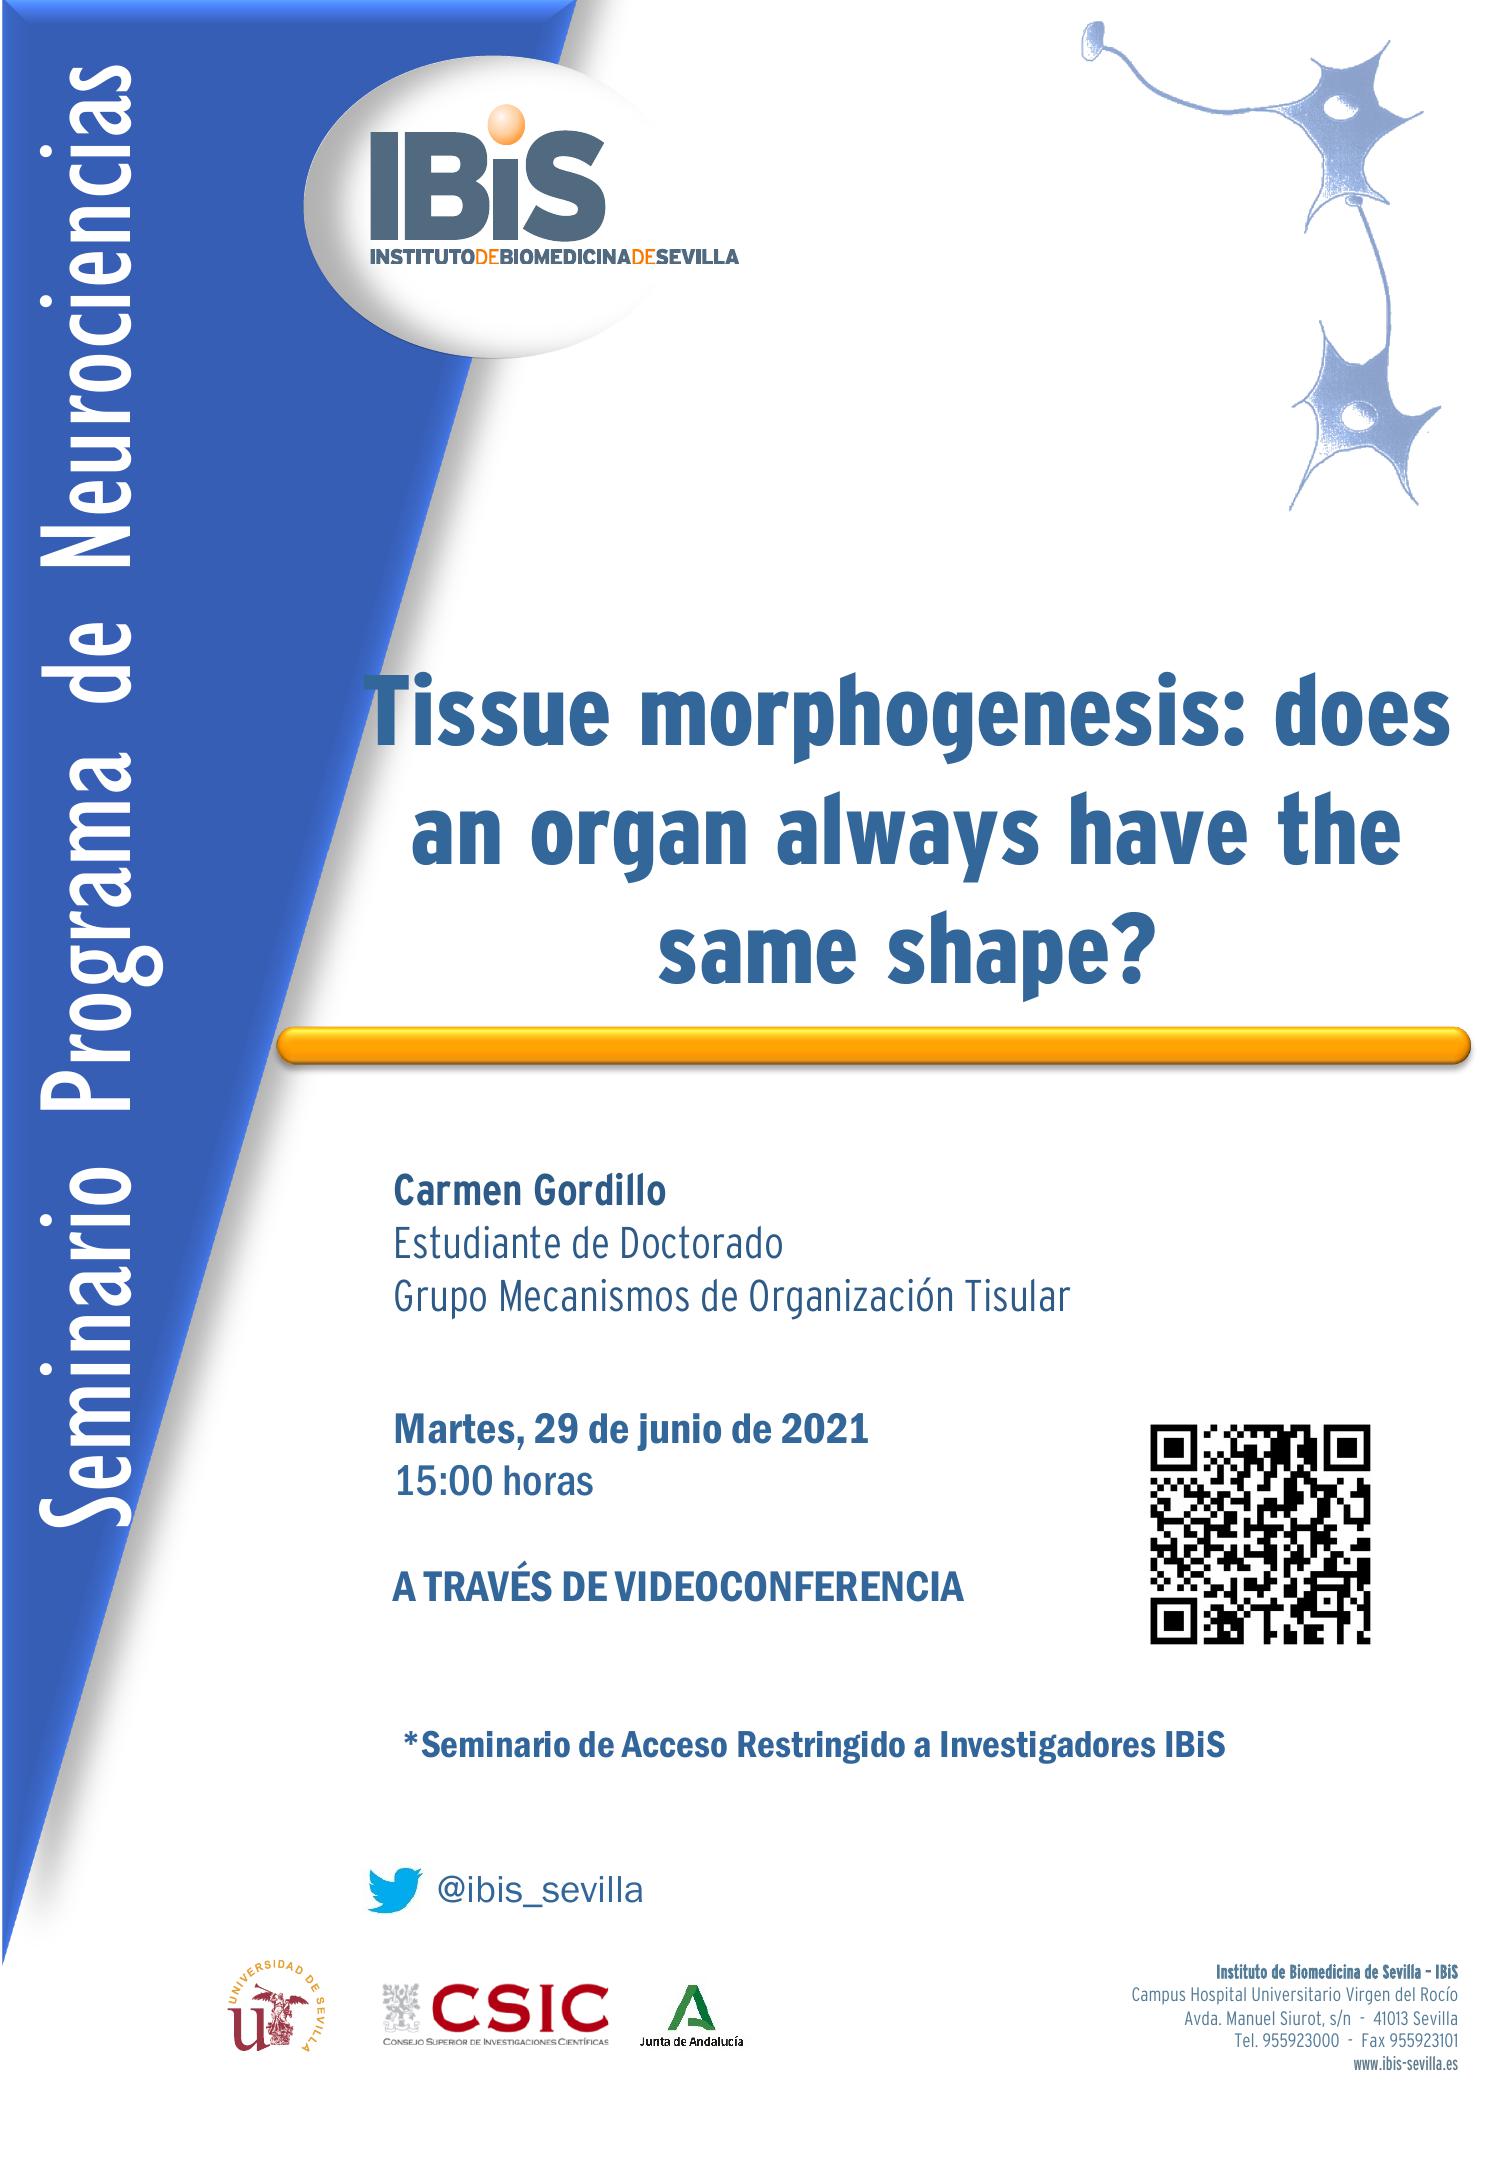 Poster: Tissue morphogenesis: does an organ always have the same shape?